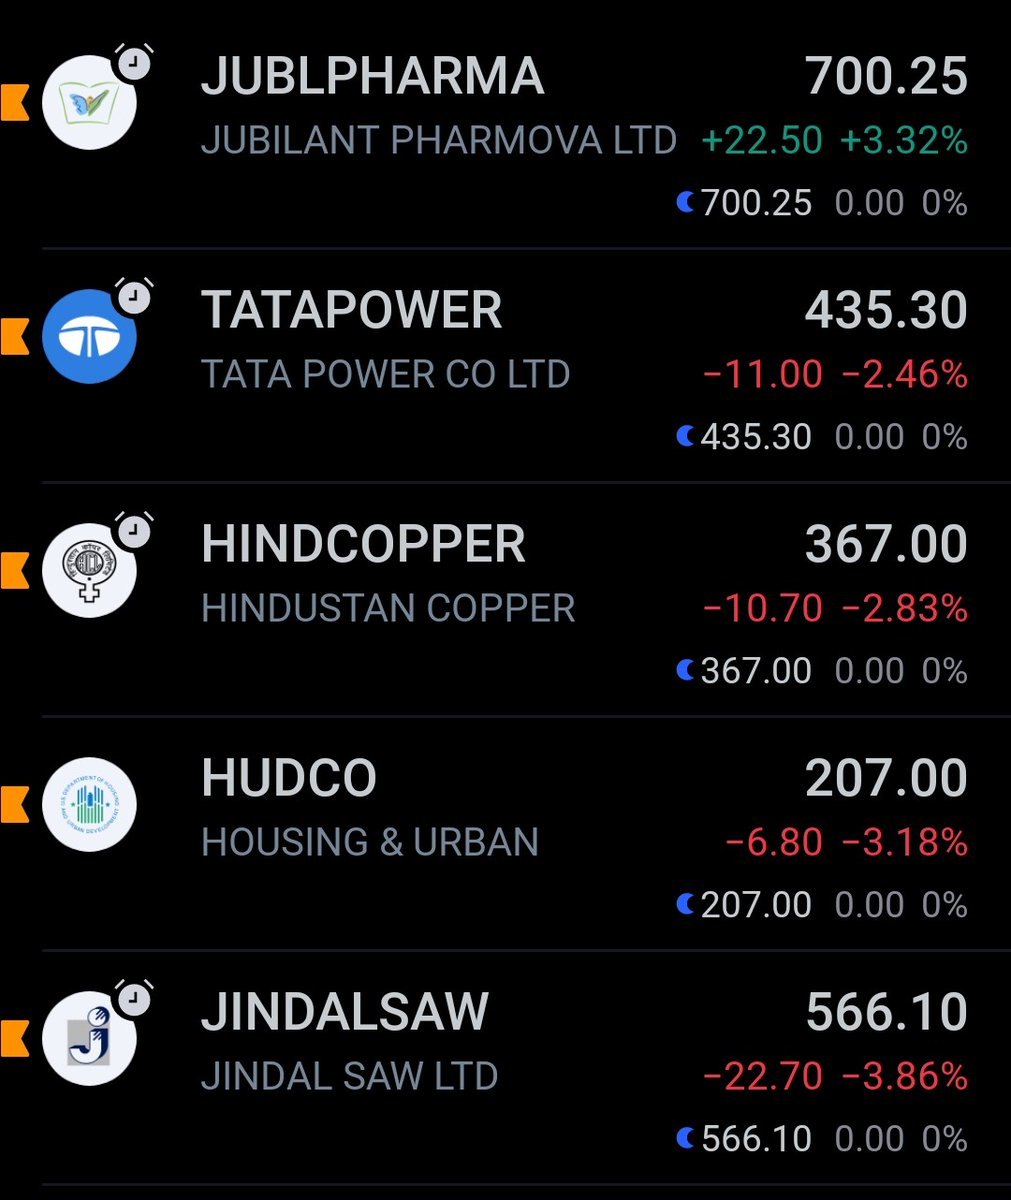 Left with 5 position 
#Hindcopper 
#Tatapower 
#Jindalsaw 
#Jublpharma
#Hudco

With Total Investment of 120%

Last two days was Volatile but I had followed My TRADE MANAGEMENT RULE. 
All trades which I have taken are available on my timeline.